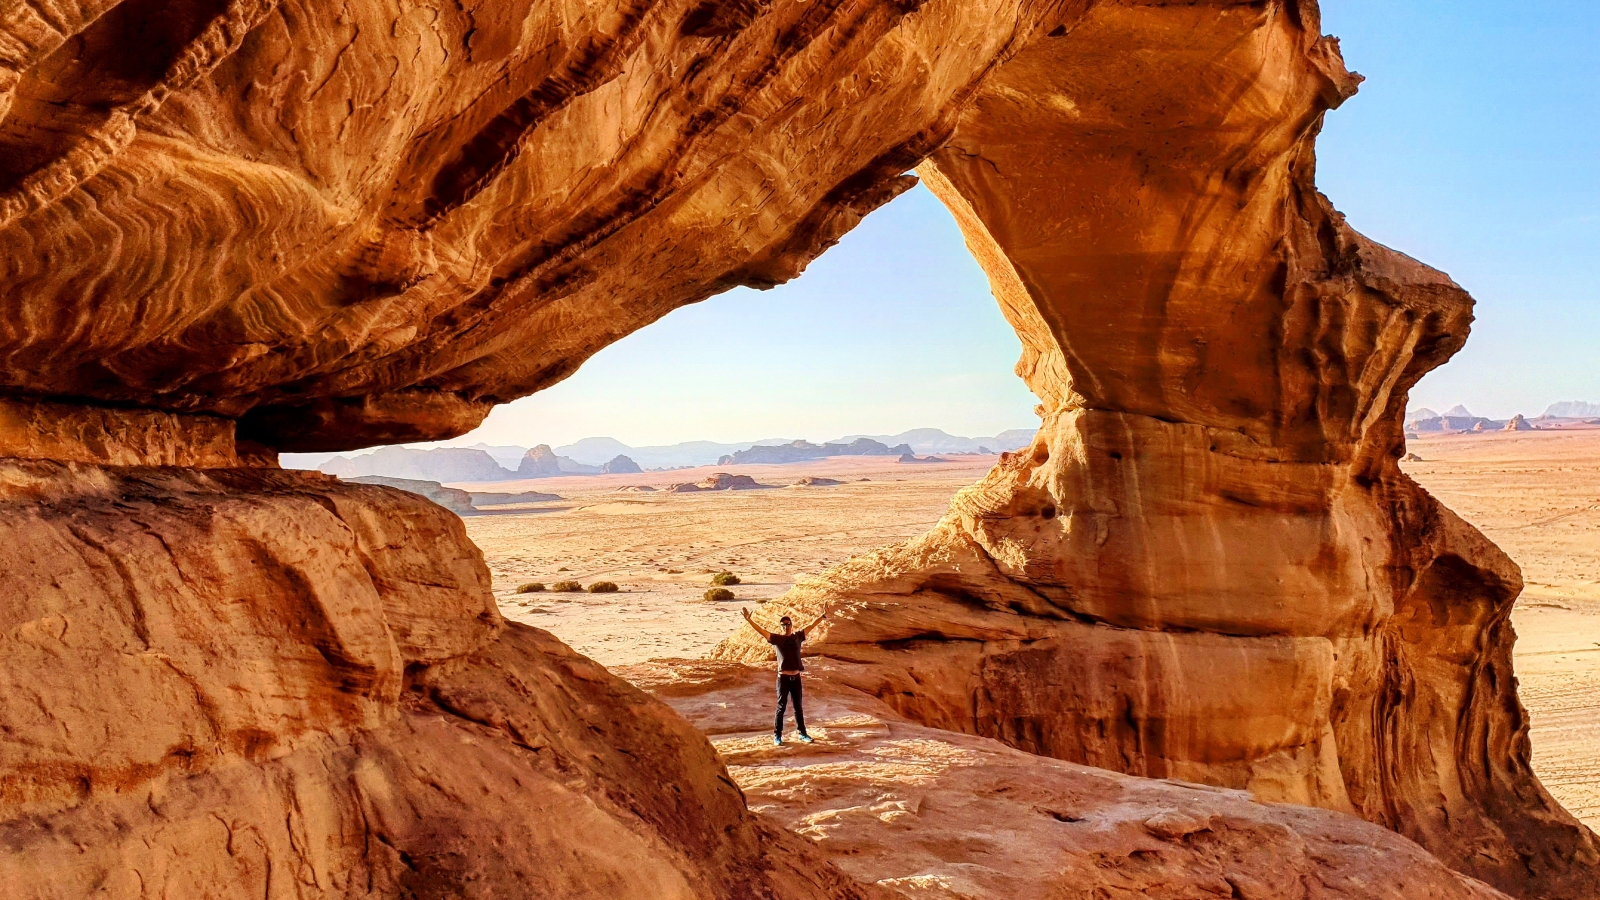 Wadi Rum photographed by Lior Dahan